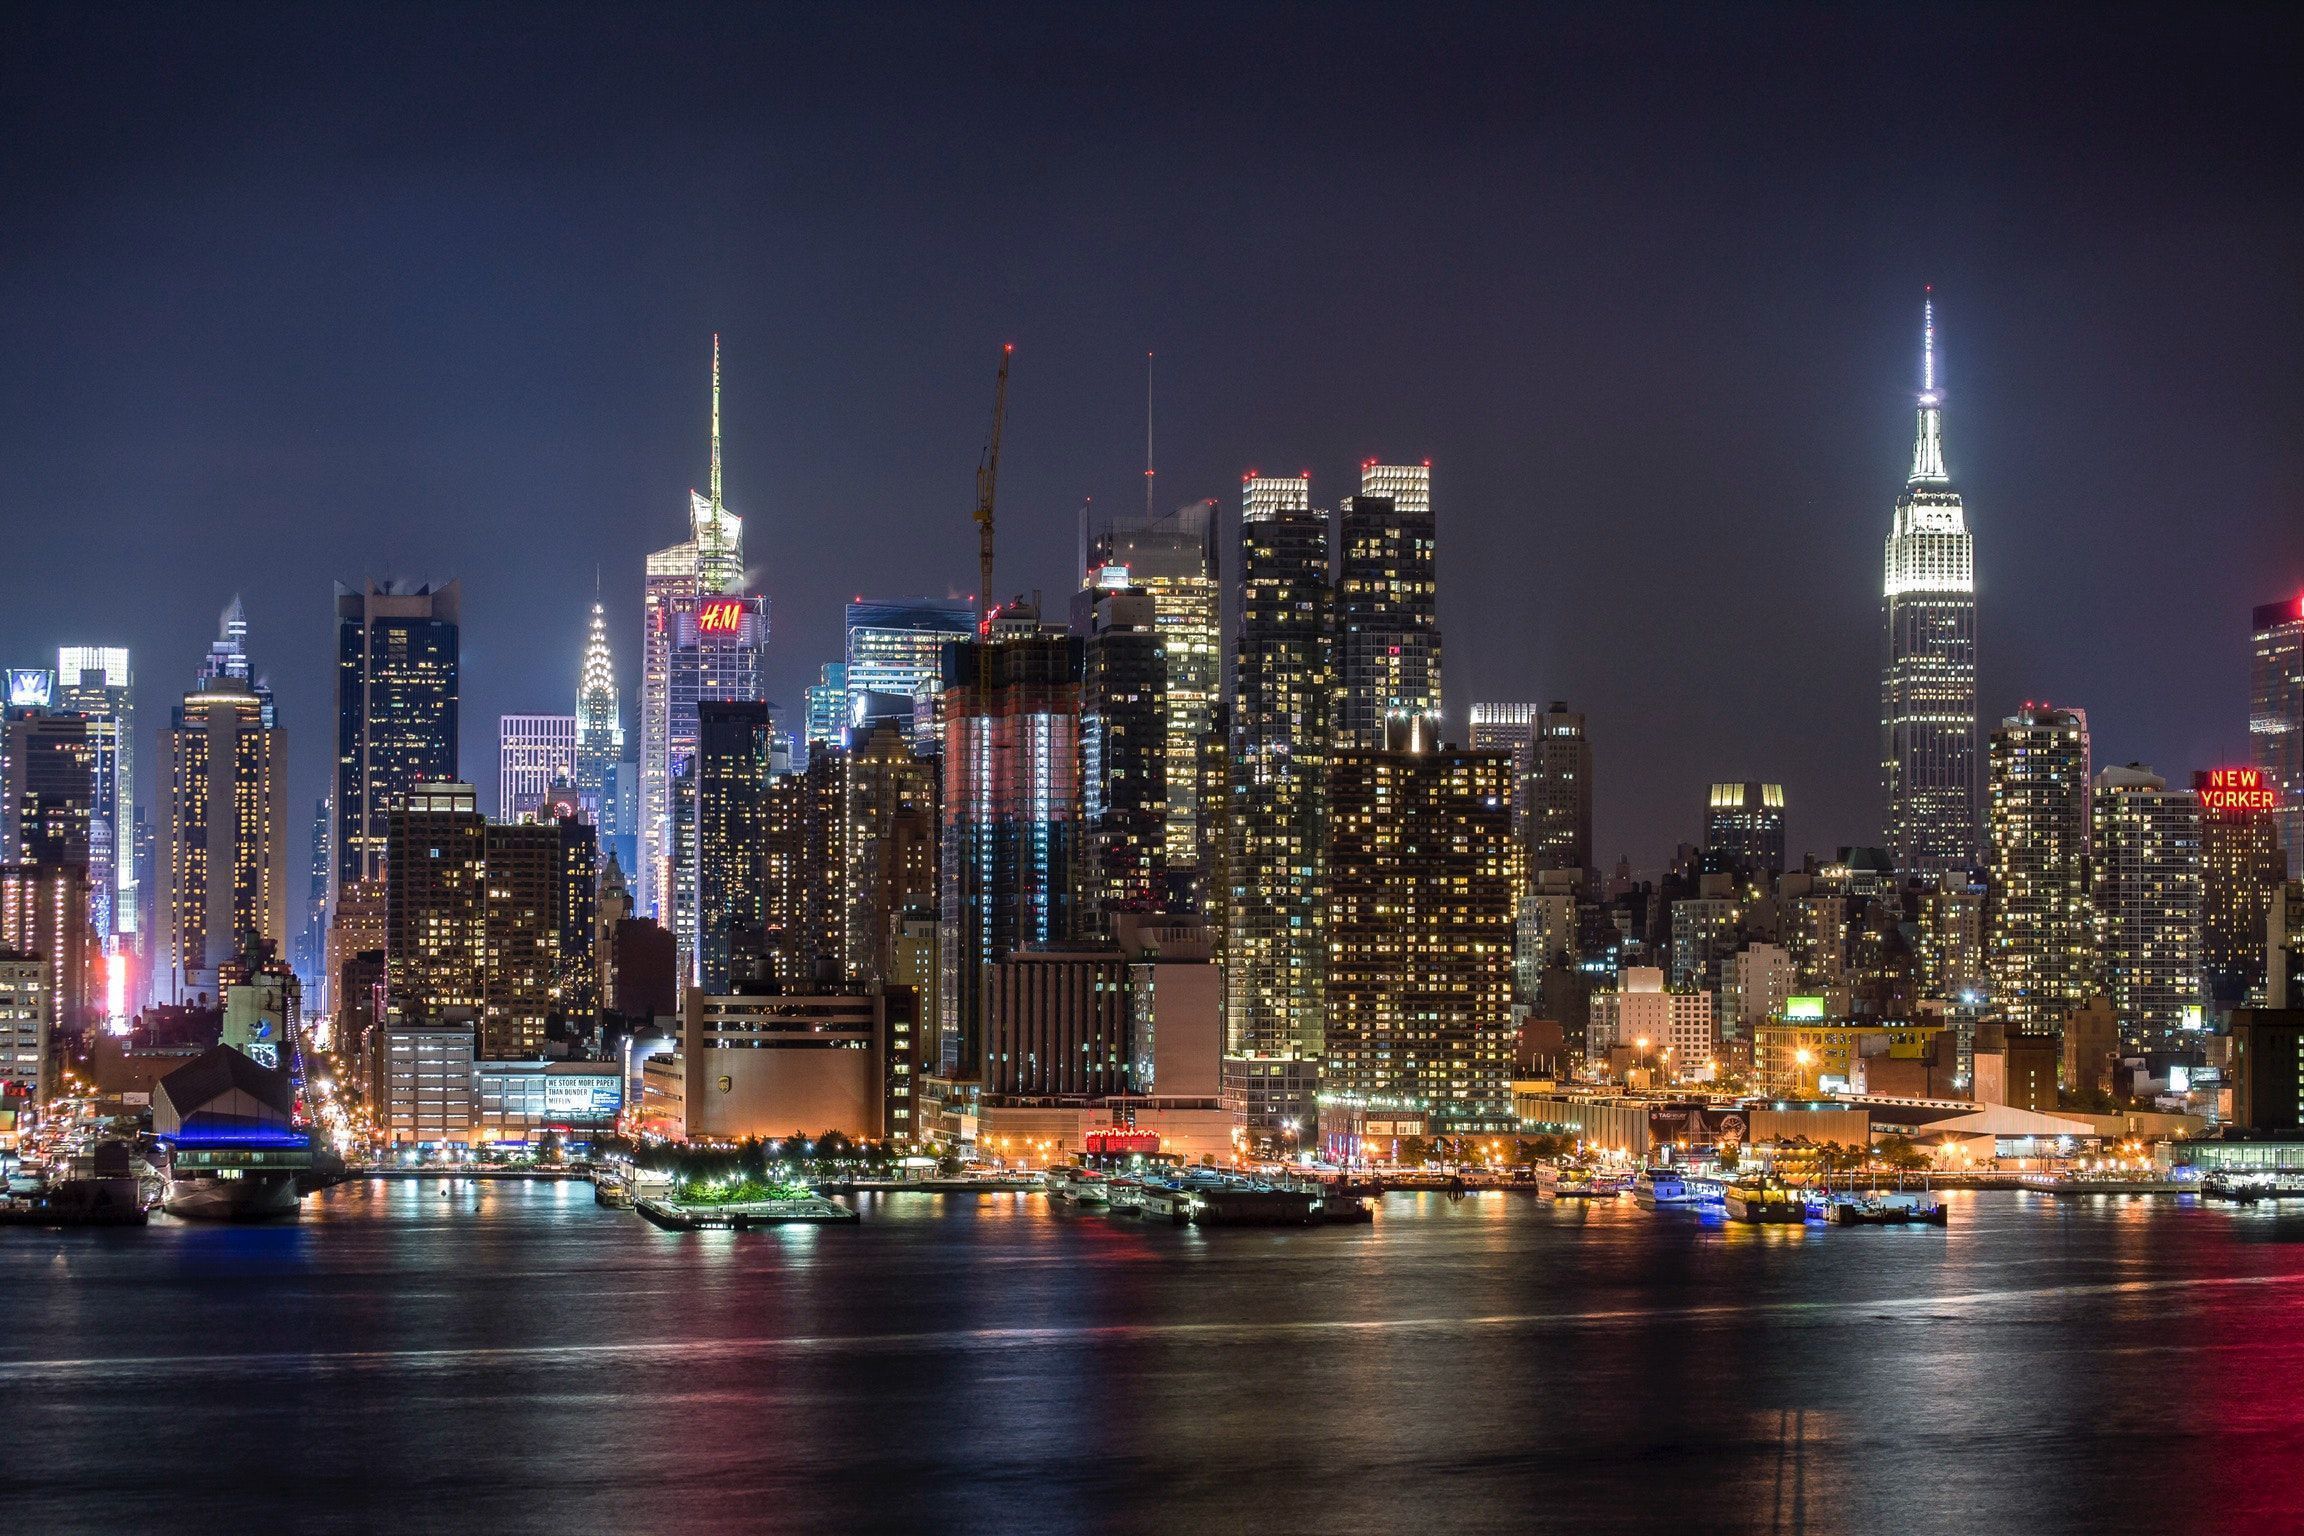 A city skyline at night with boats in the water - New York